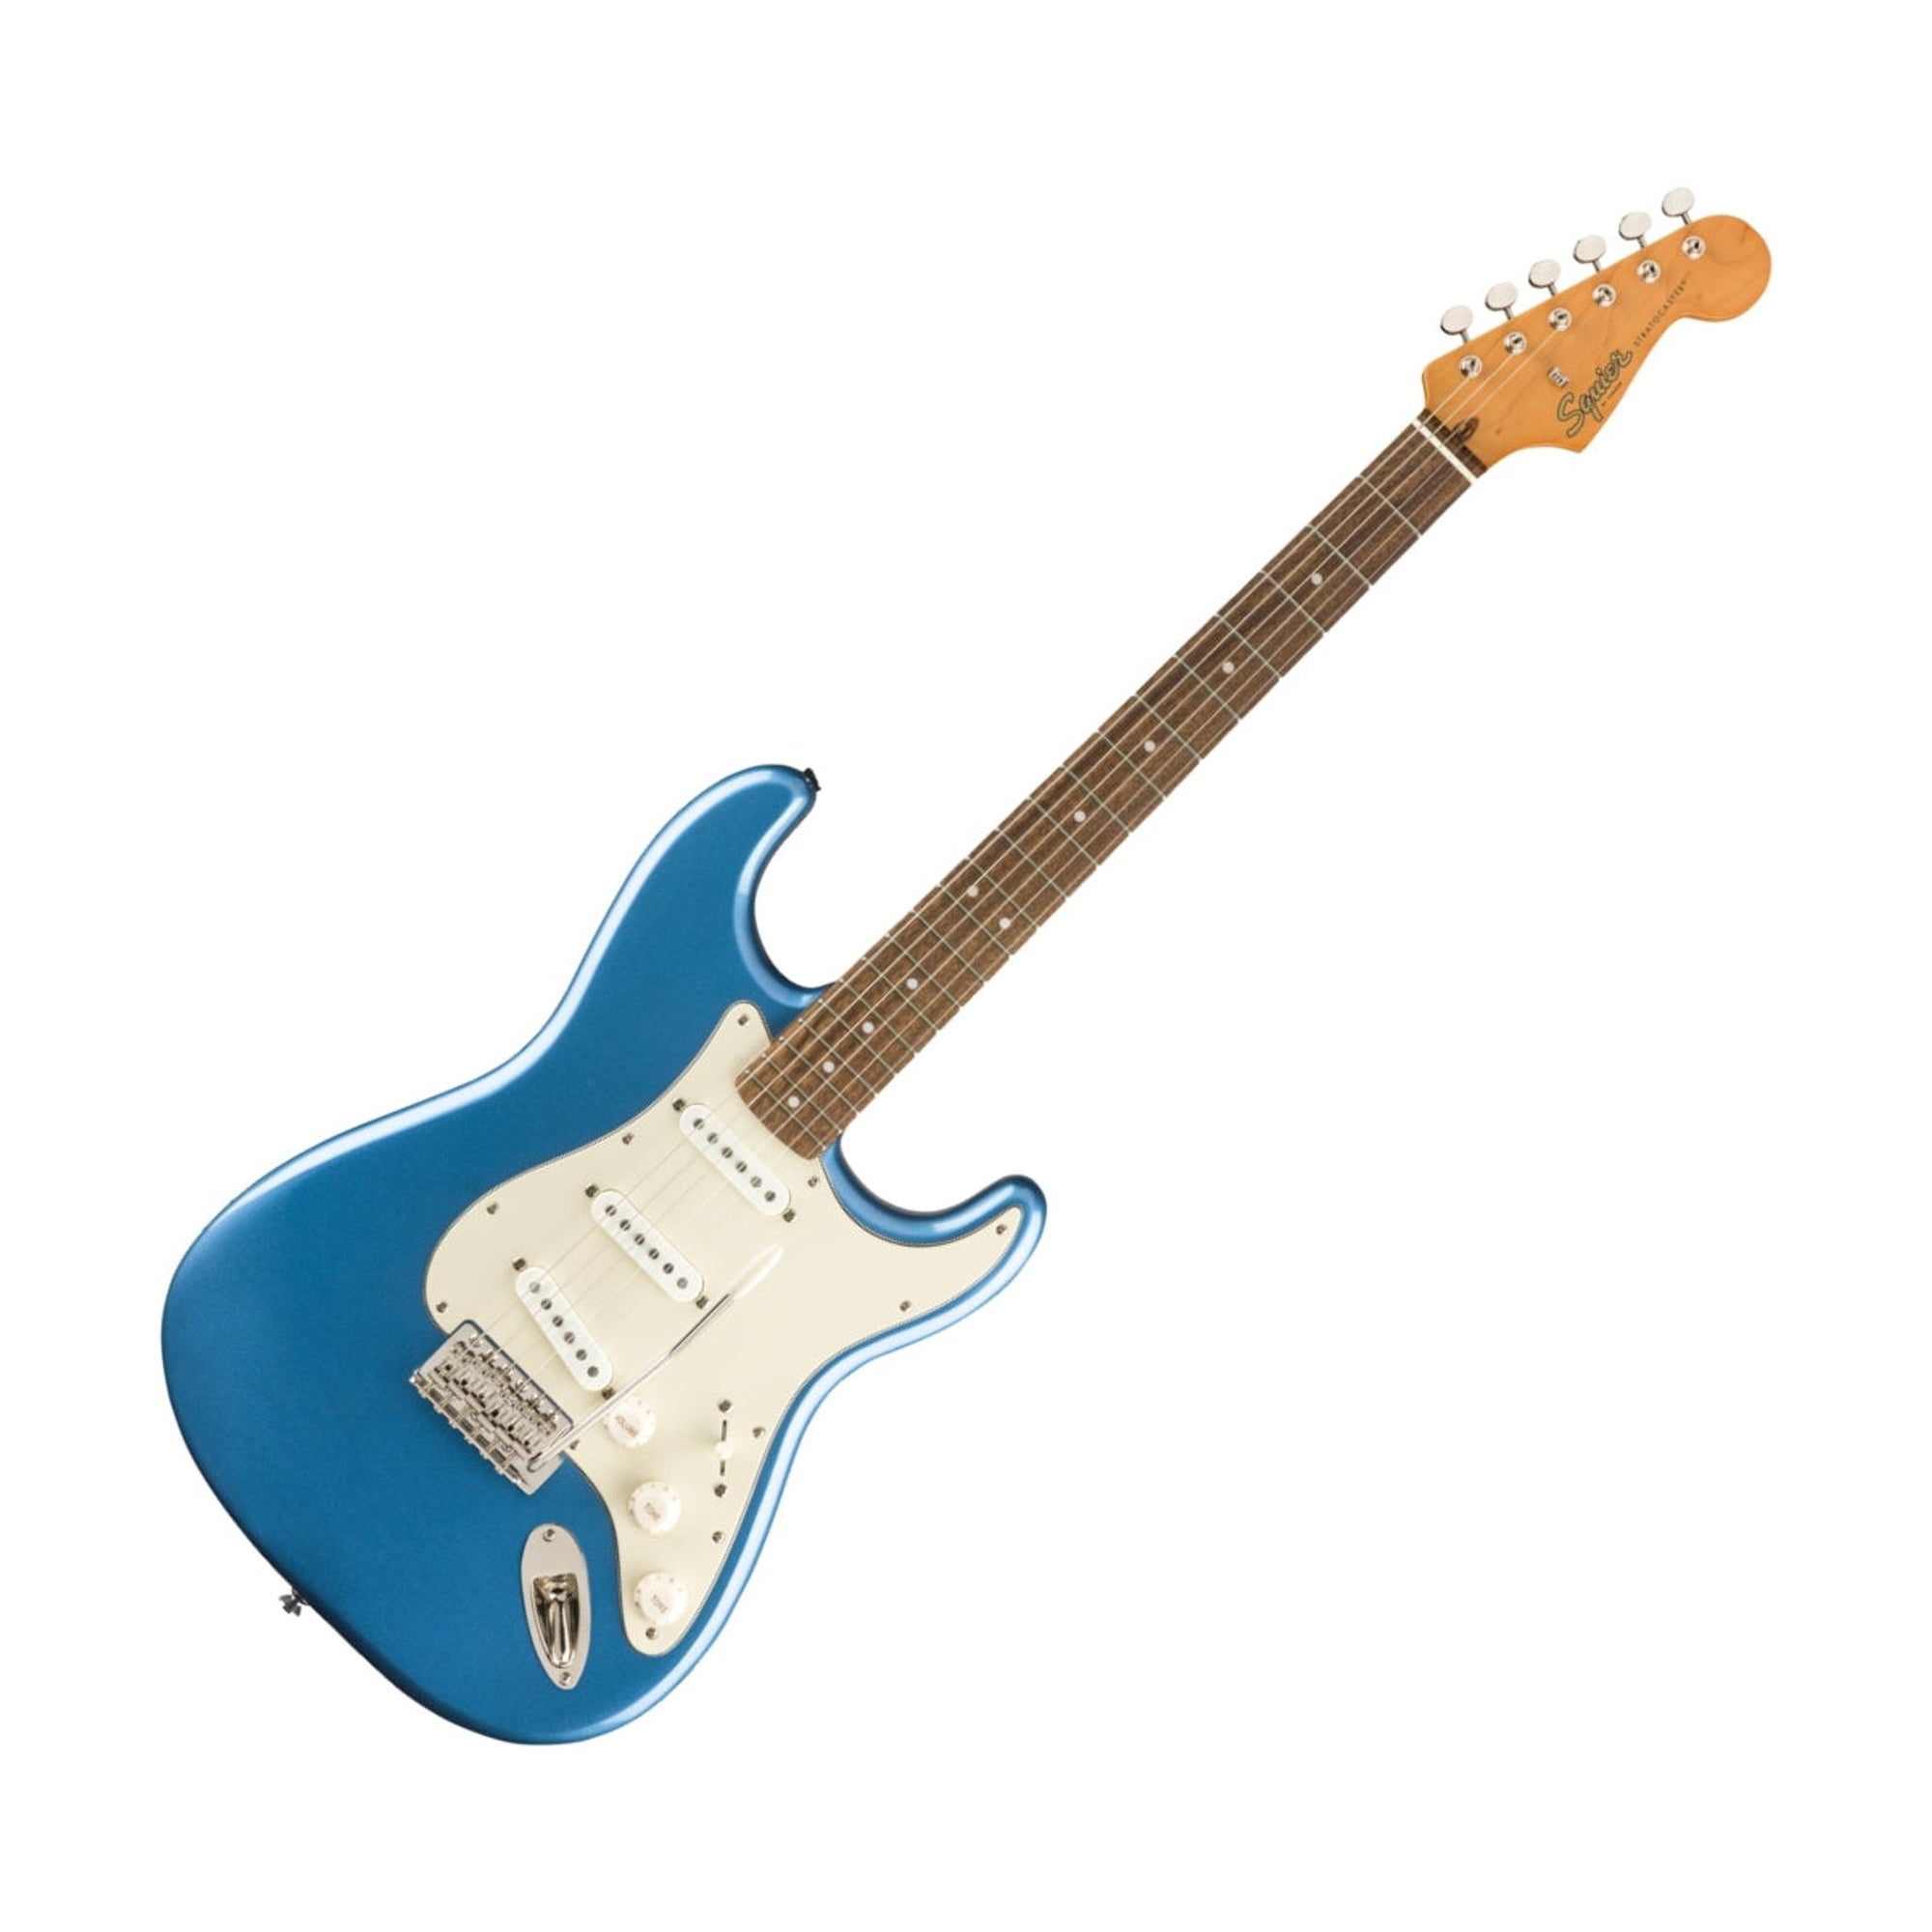 The Fender Squier Classic Vibe ‘60s Stratocaster creates incredible tone. This throwback Squier model also features 1960s-inspired styling for an old-school vibe.